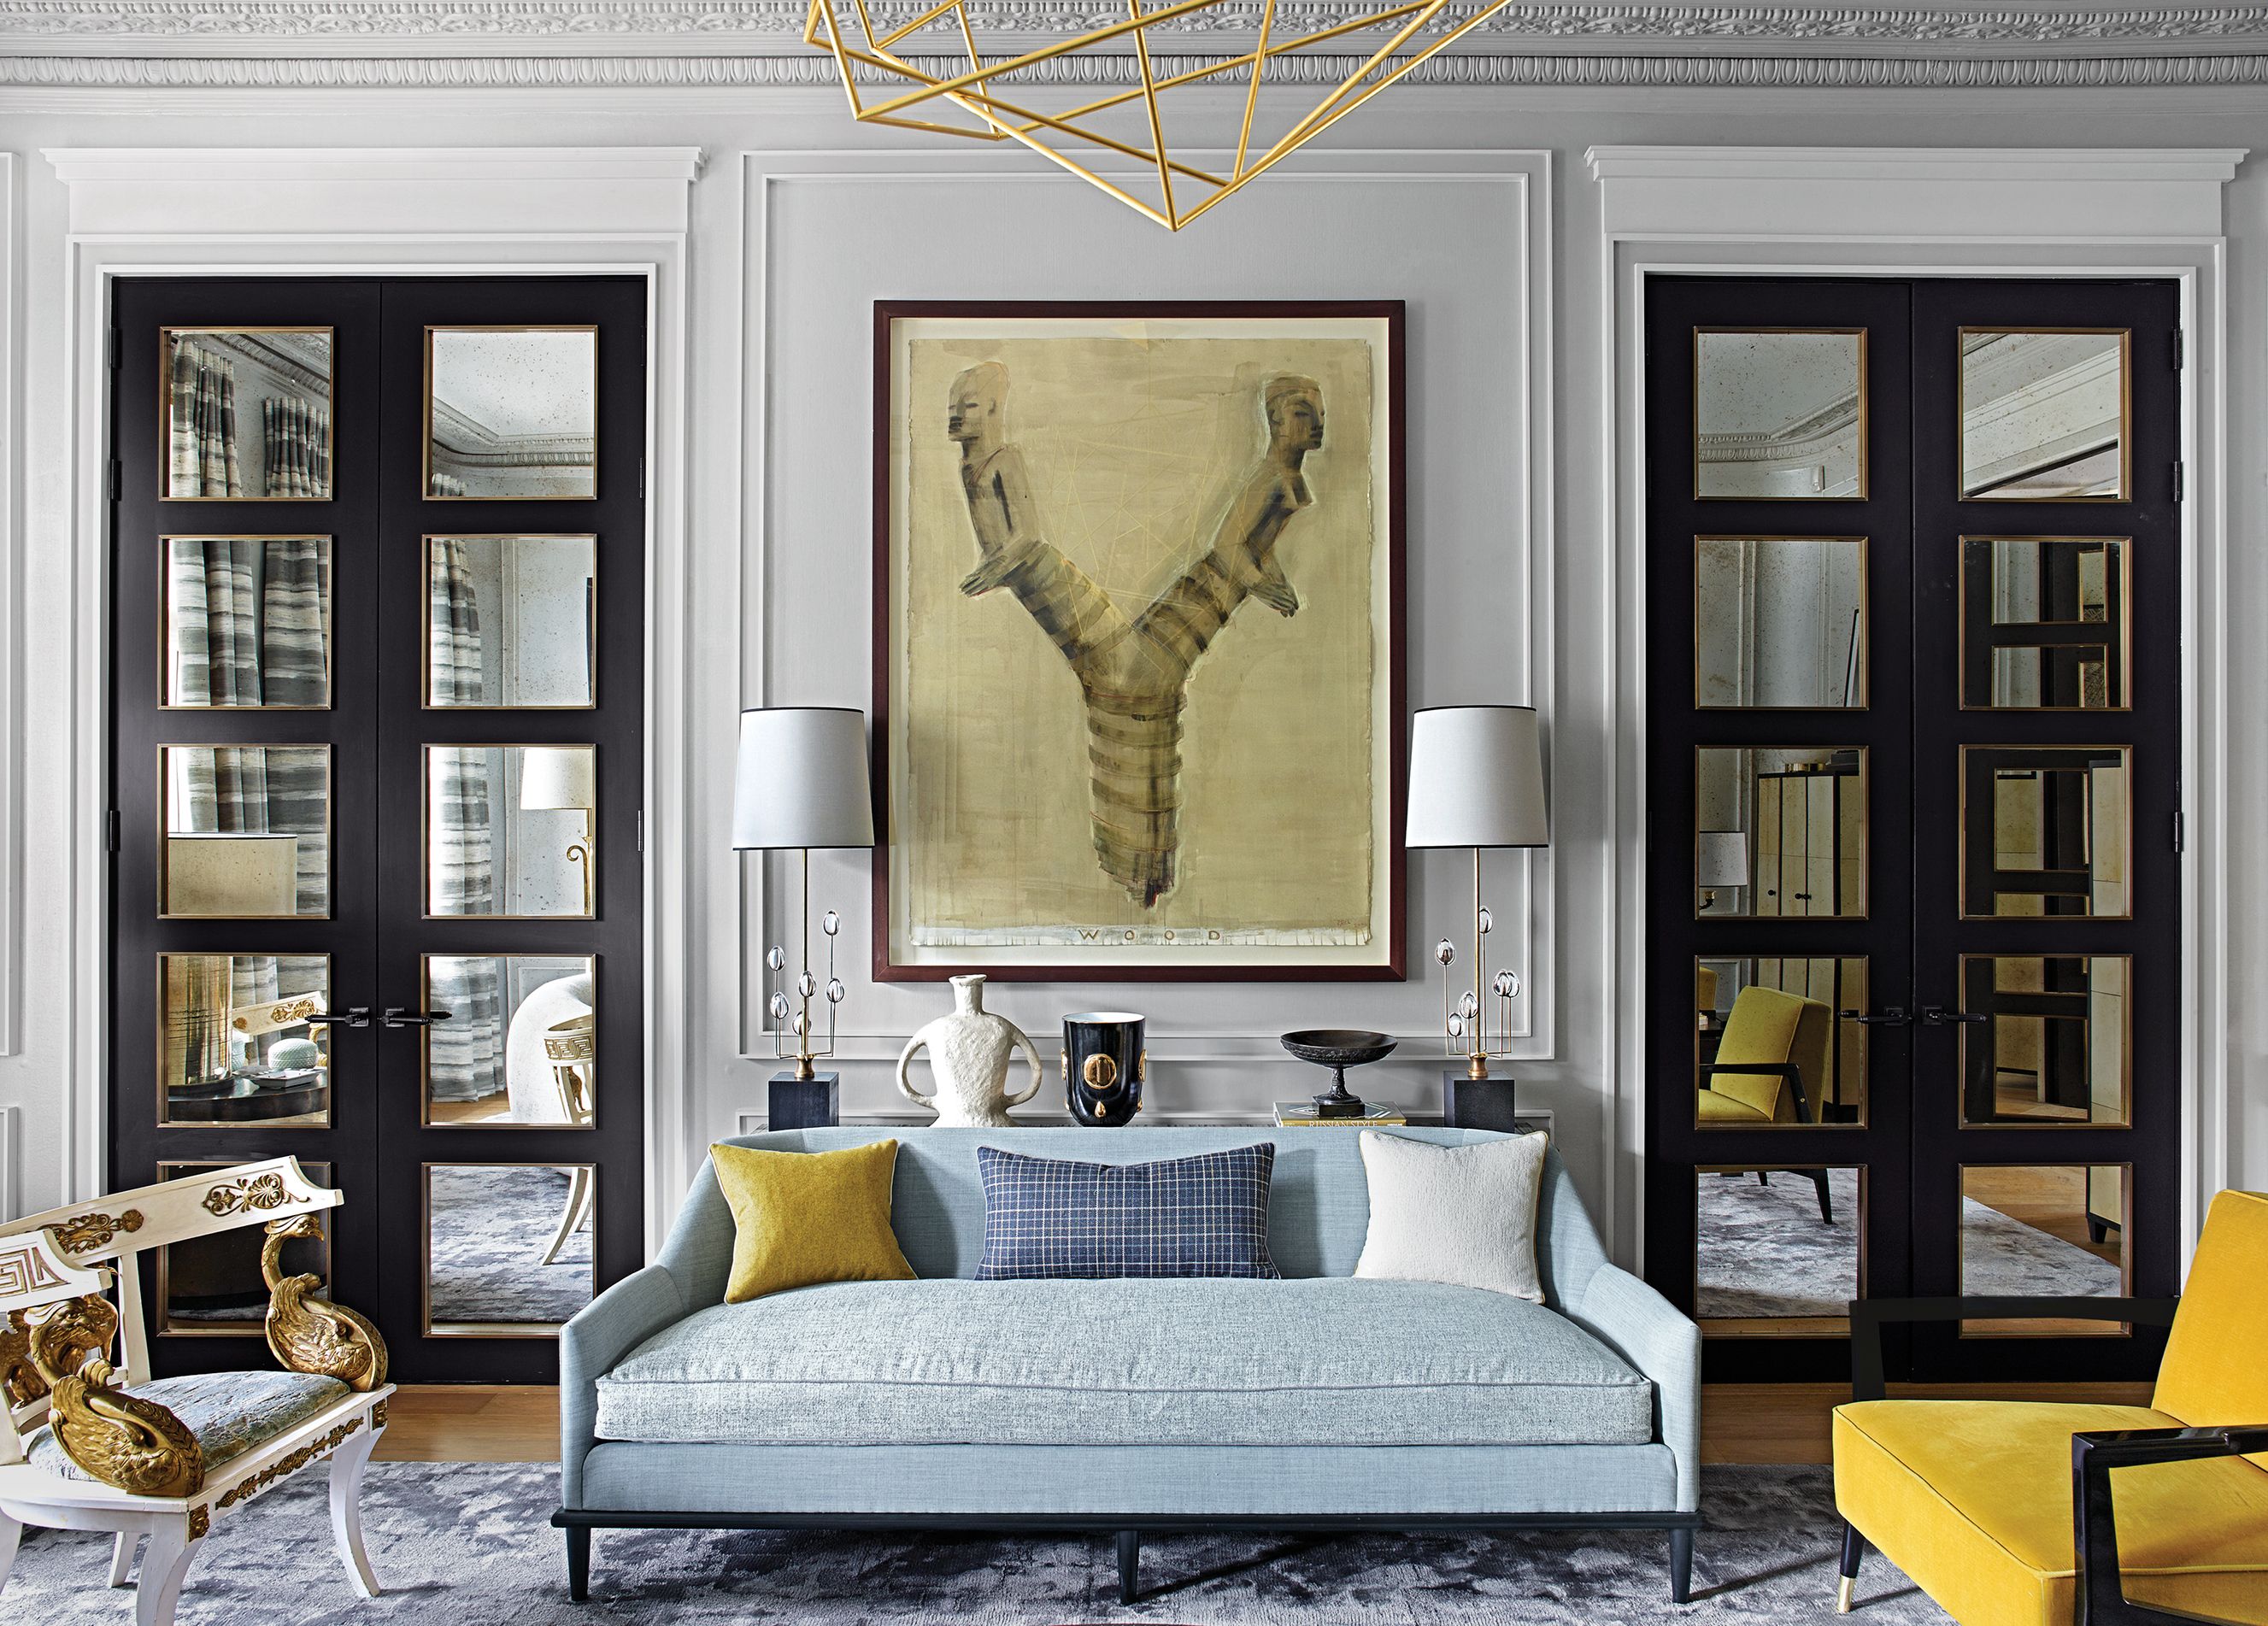 Jean-Louis Deniot Brings French Flair to a Chicago Home